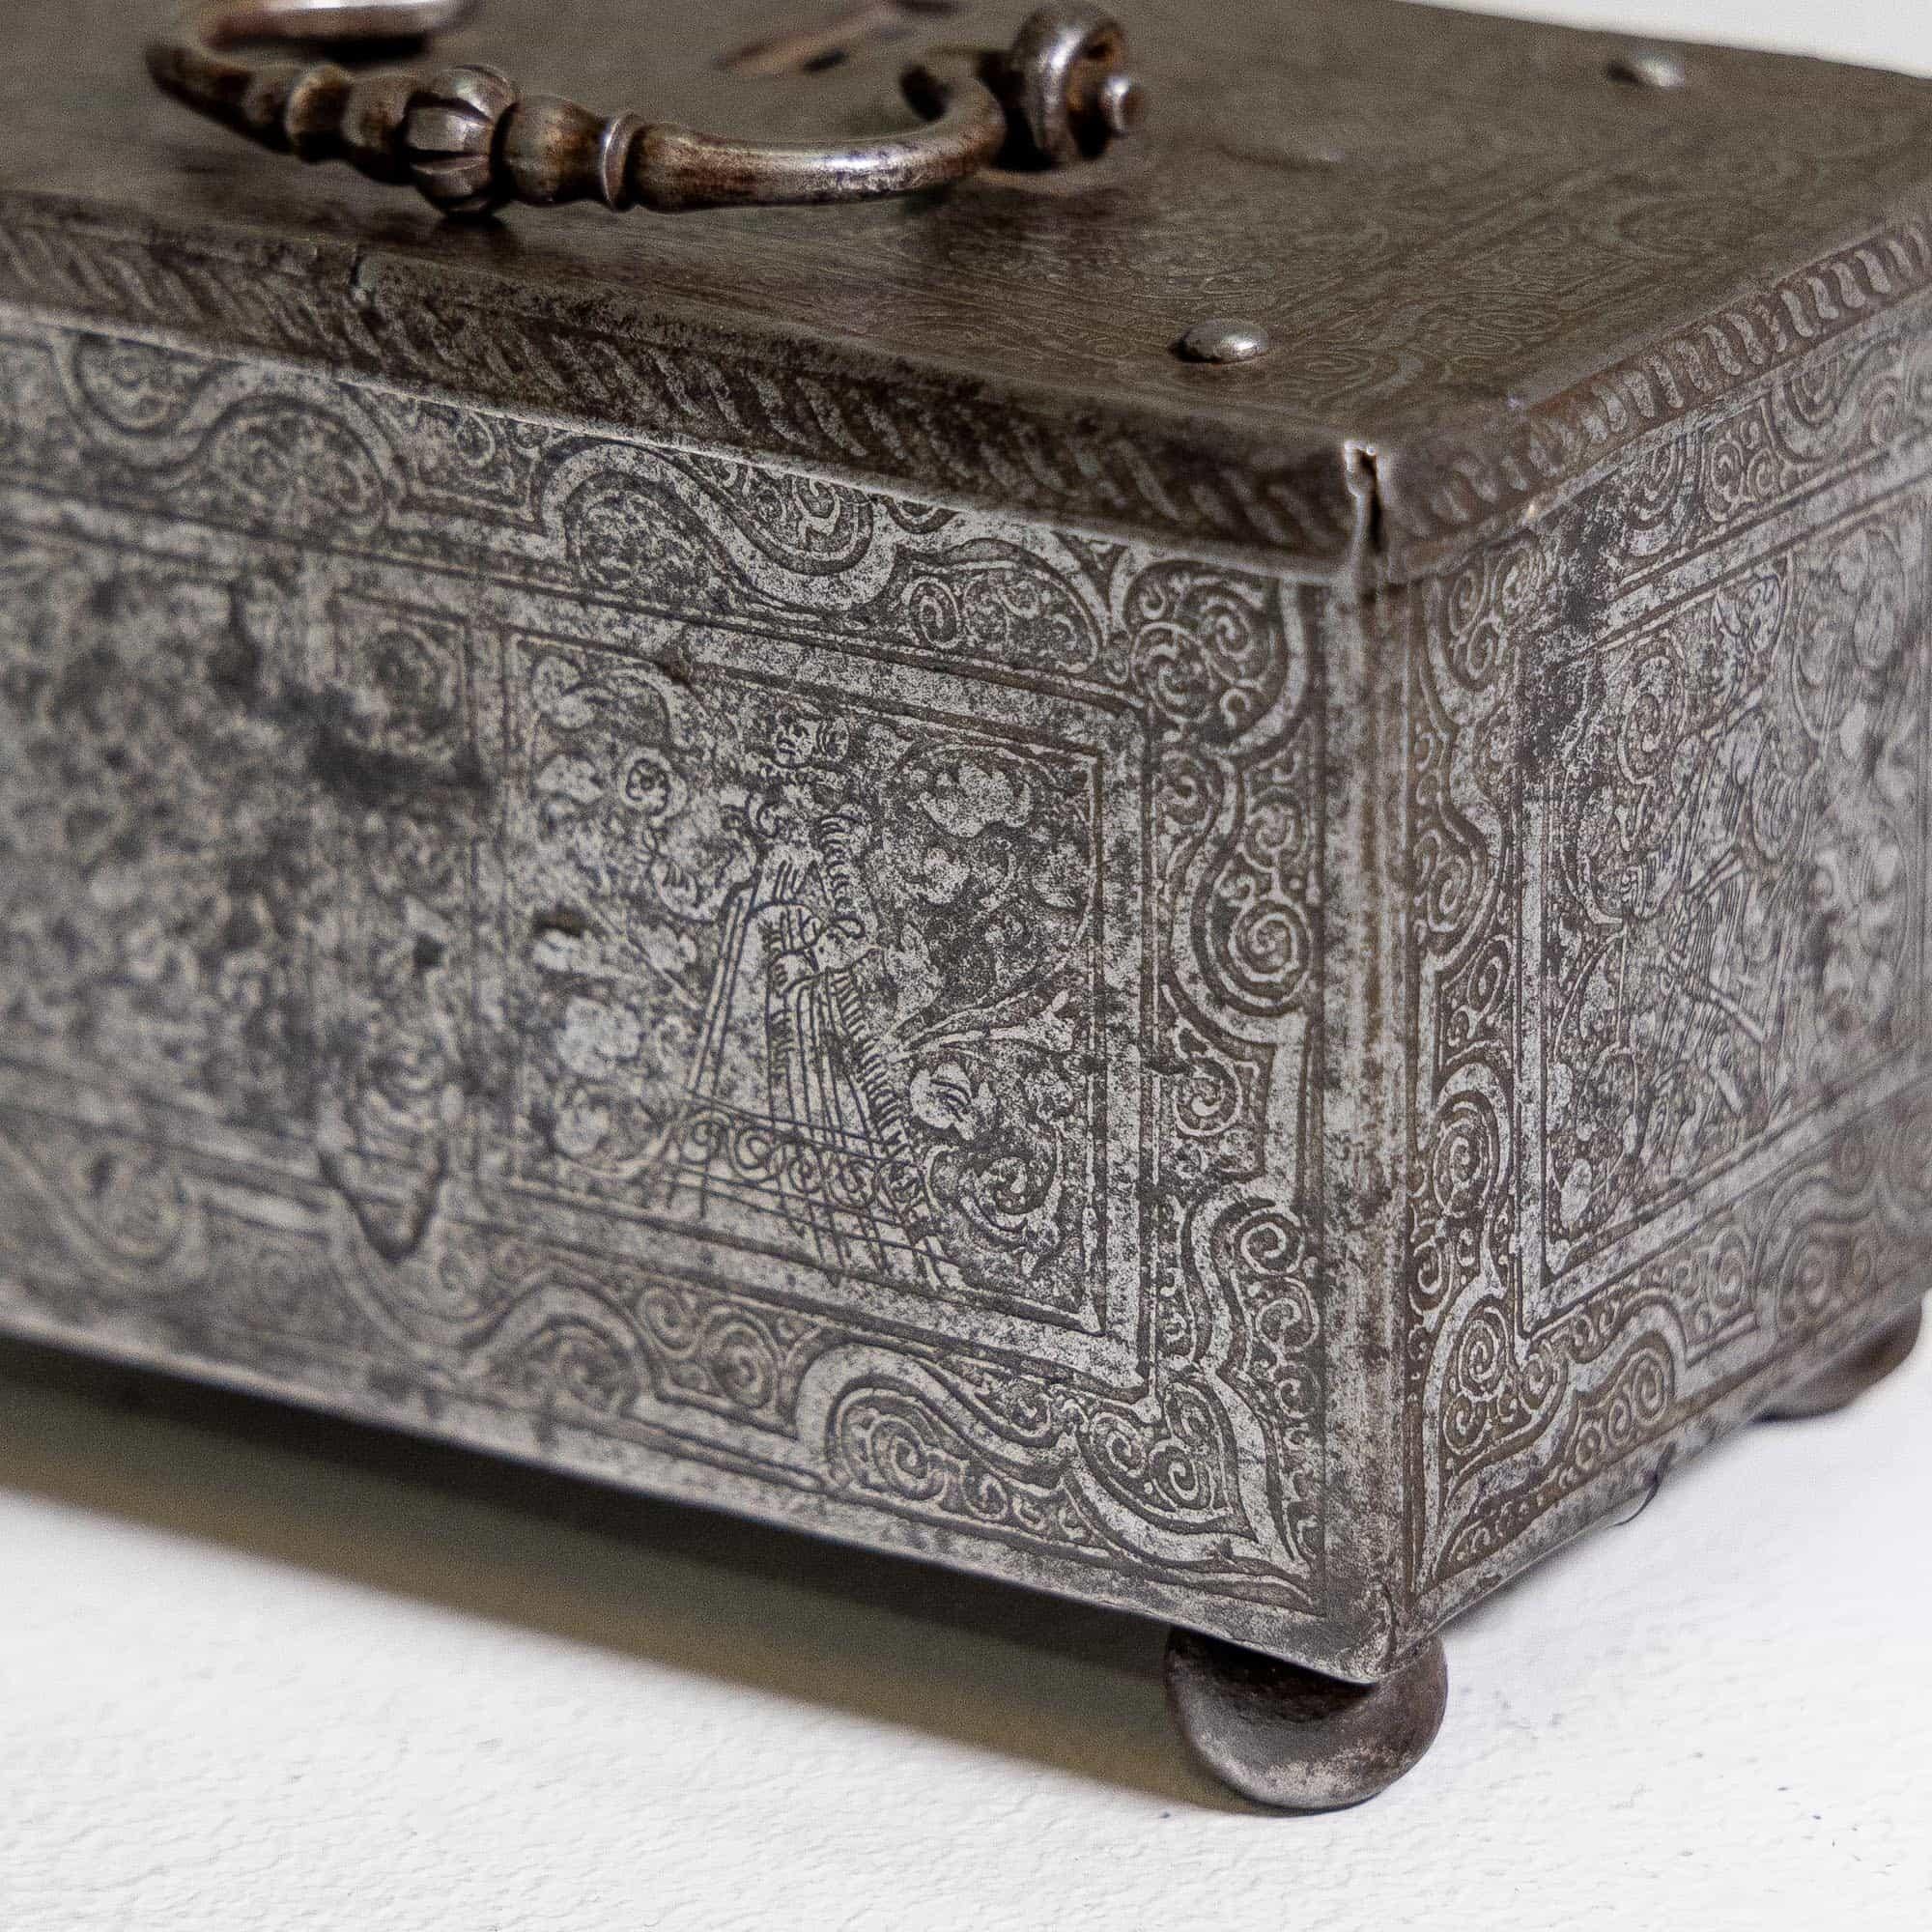 18th Century and Earlier Iron Cassette with Keys and chased Decor, Nuremberg around 1580